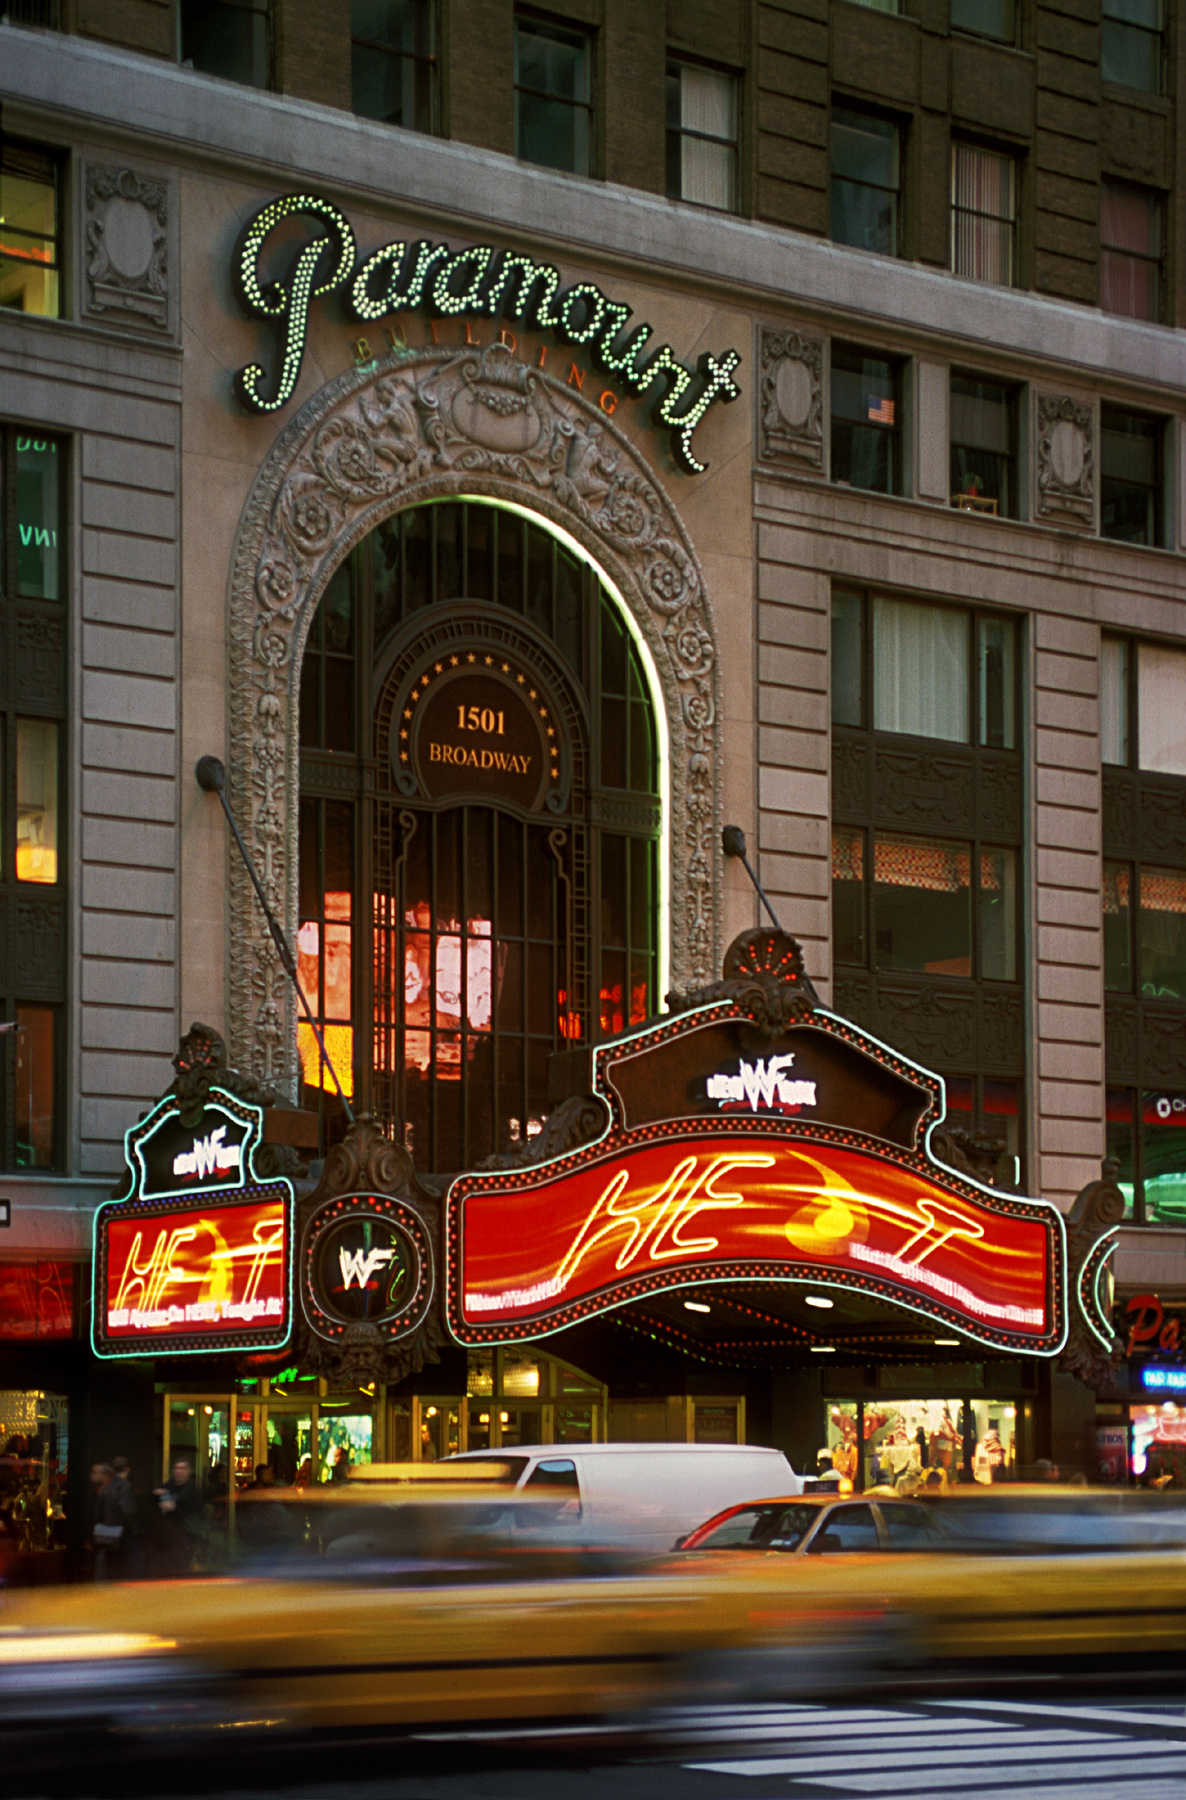 Paramount Building Marquee & Arch. Tobin Parnes Design. New York, NY. Historic Preservation. Street View.